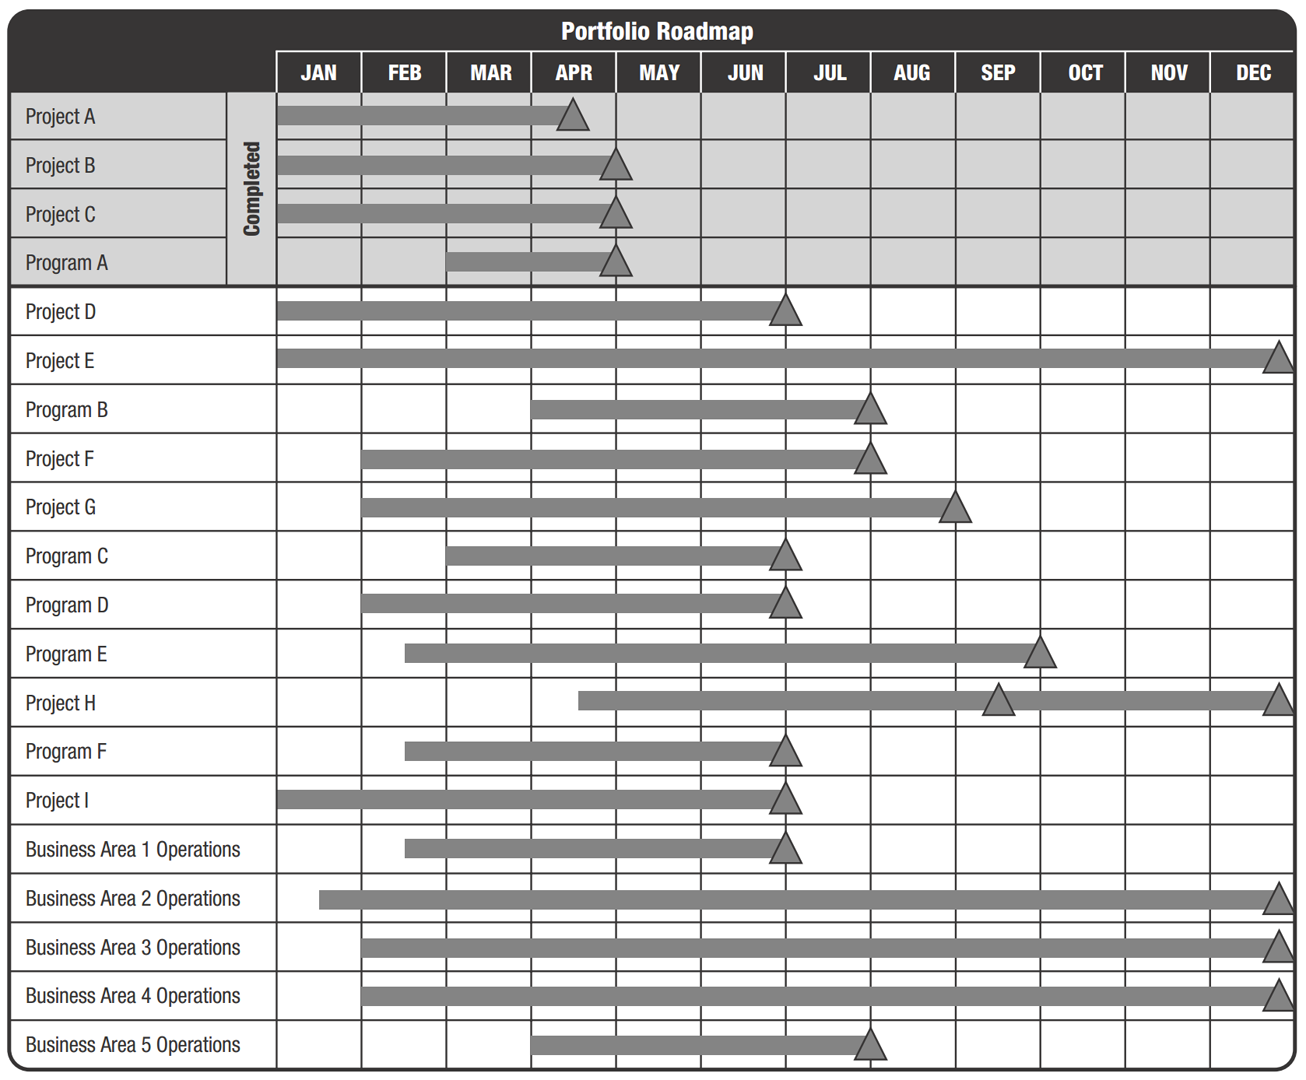 A table listing all projects (A-I), programs (A-F), and business area operations (1-5) and their timelines across 12 months. The table also indicates which projects and programs are completed. A Portfolio Manager can use this to determine where components of the portfolio overlap.